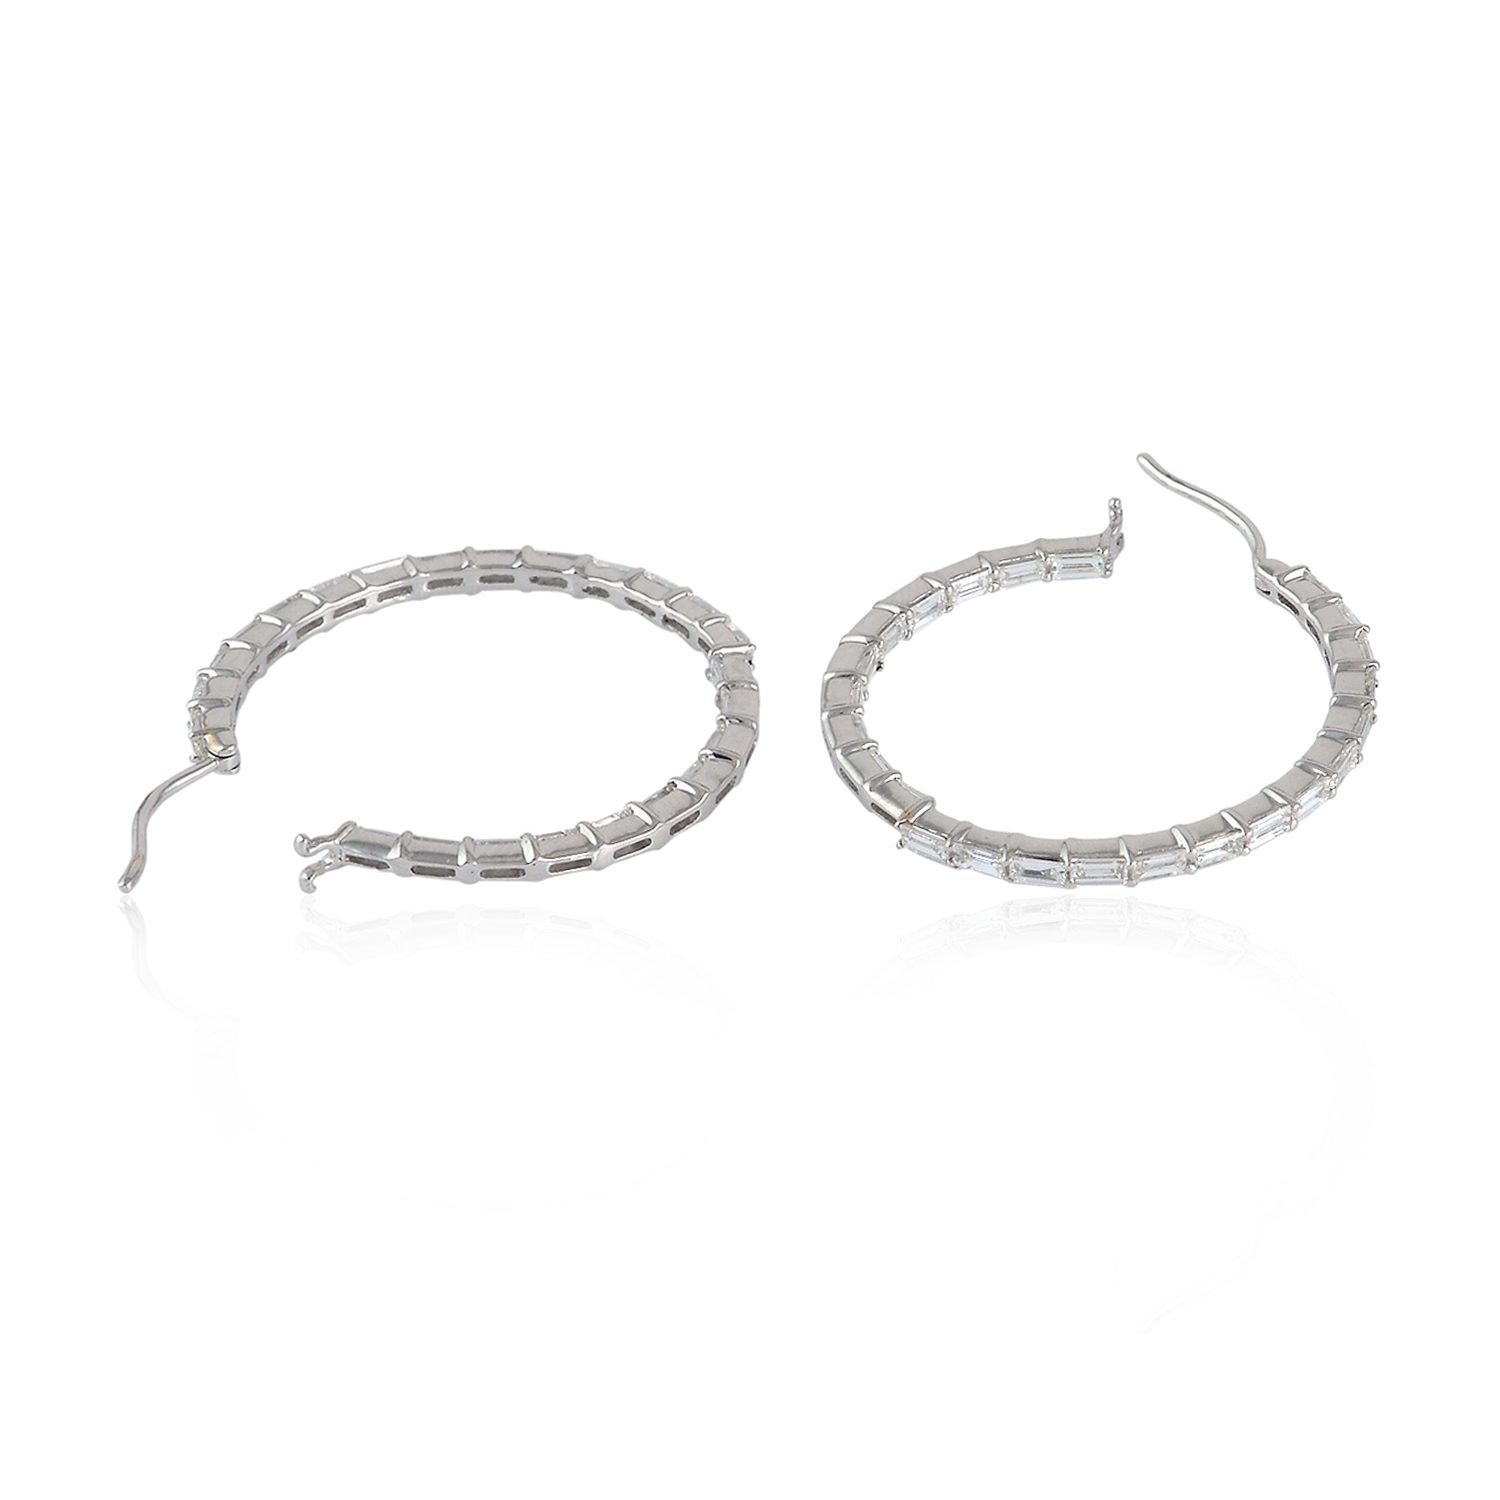 Chic Baguette Diamond Hoop Earring in 18K White Gold is cool and sexy to wear everyday from work to wine set in 18K White Gold. 

18kt Gold: 5.102gms
Diamond: 2.040cts
